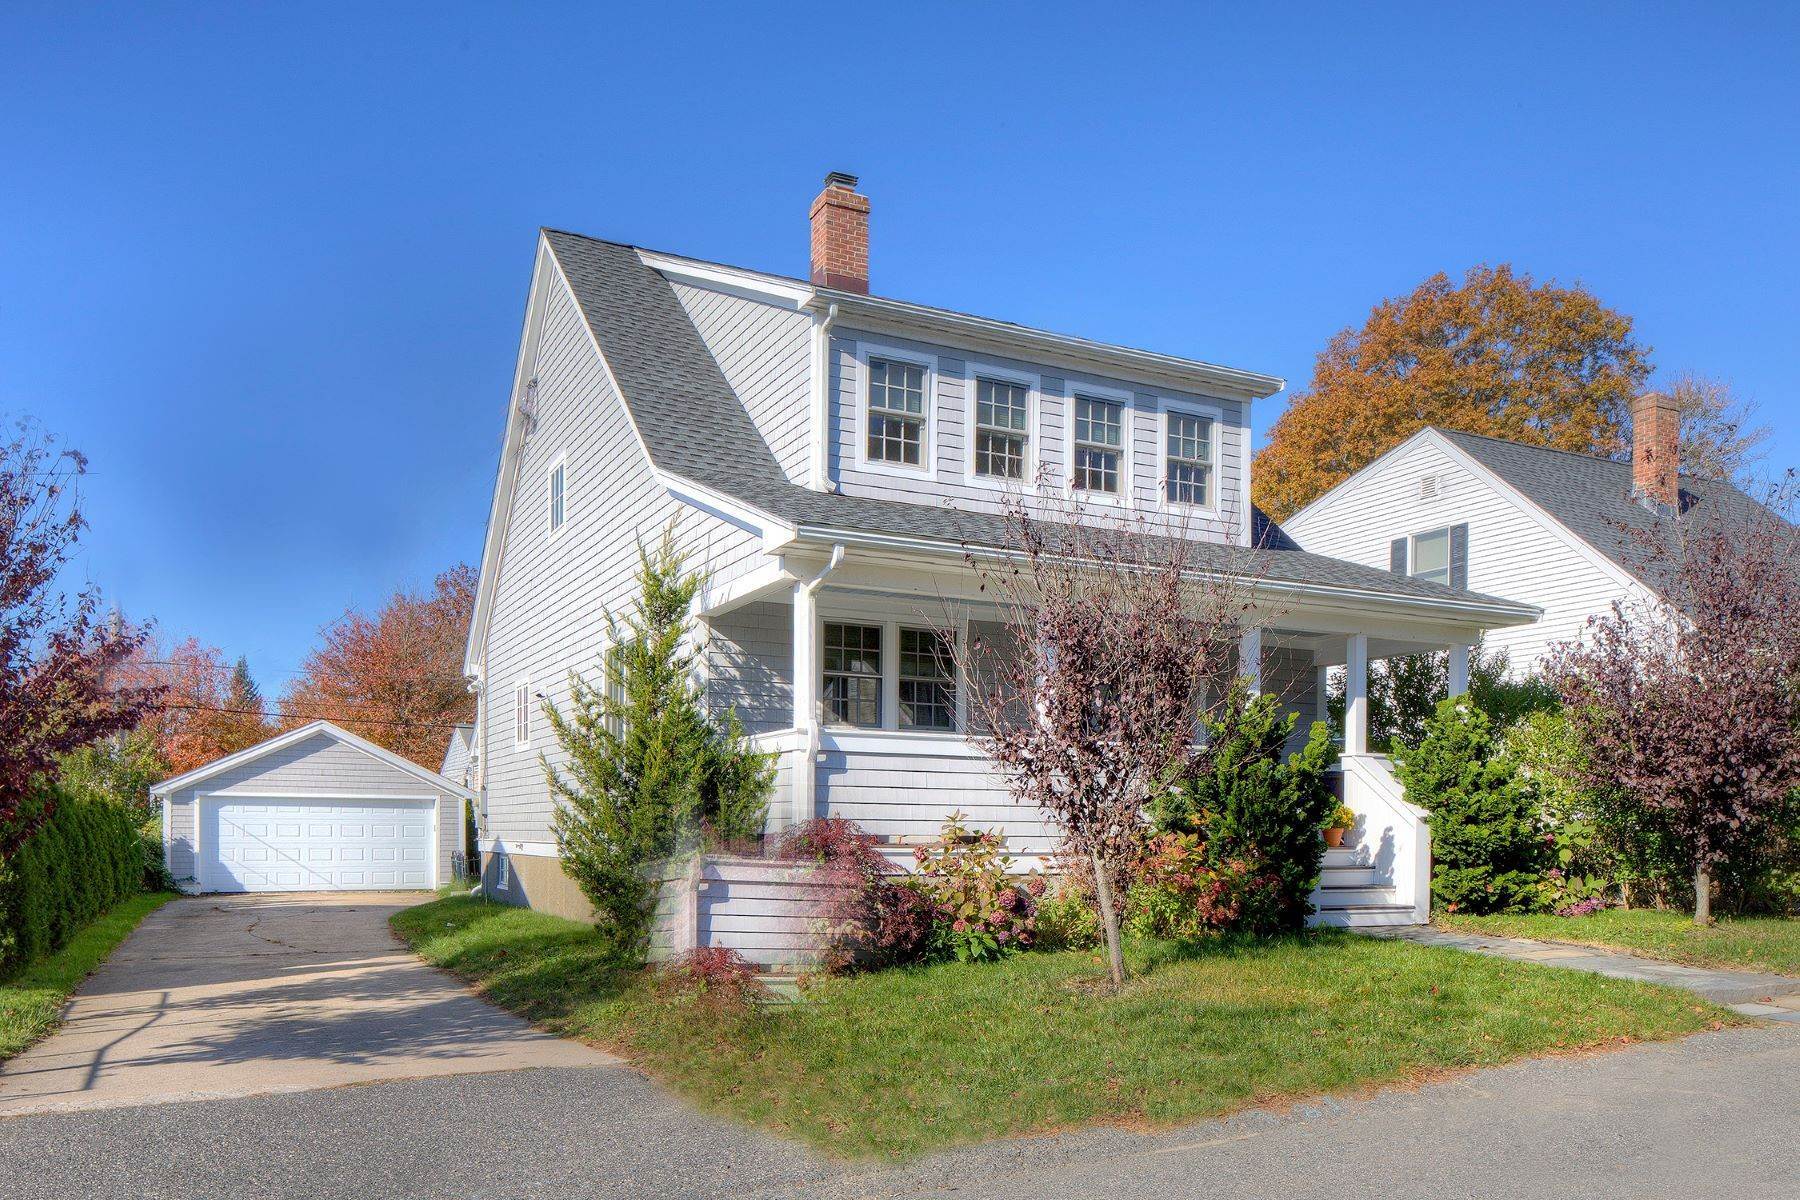 Single Family Homes for Sale at Sunny Cottage 19 Keeher Avenue Newport, Rhode Island 02840 United States